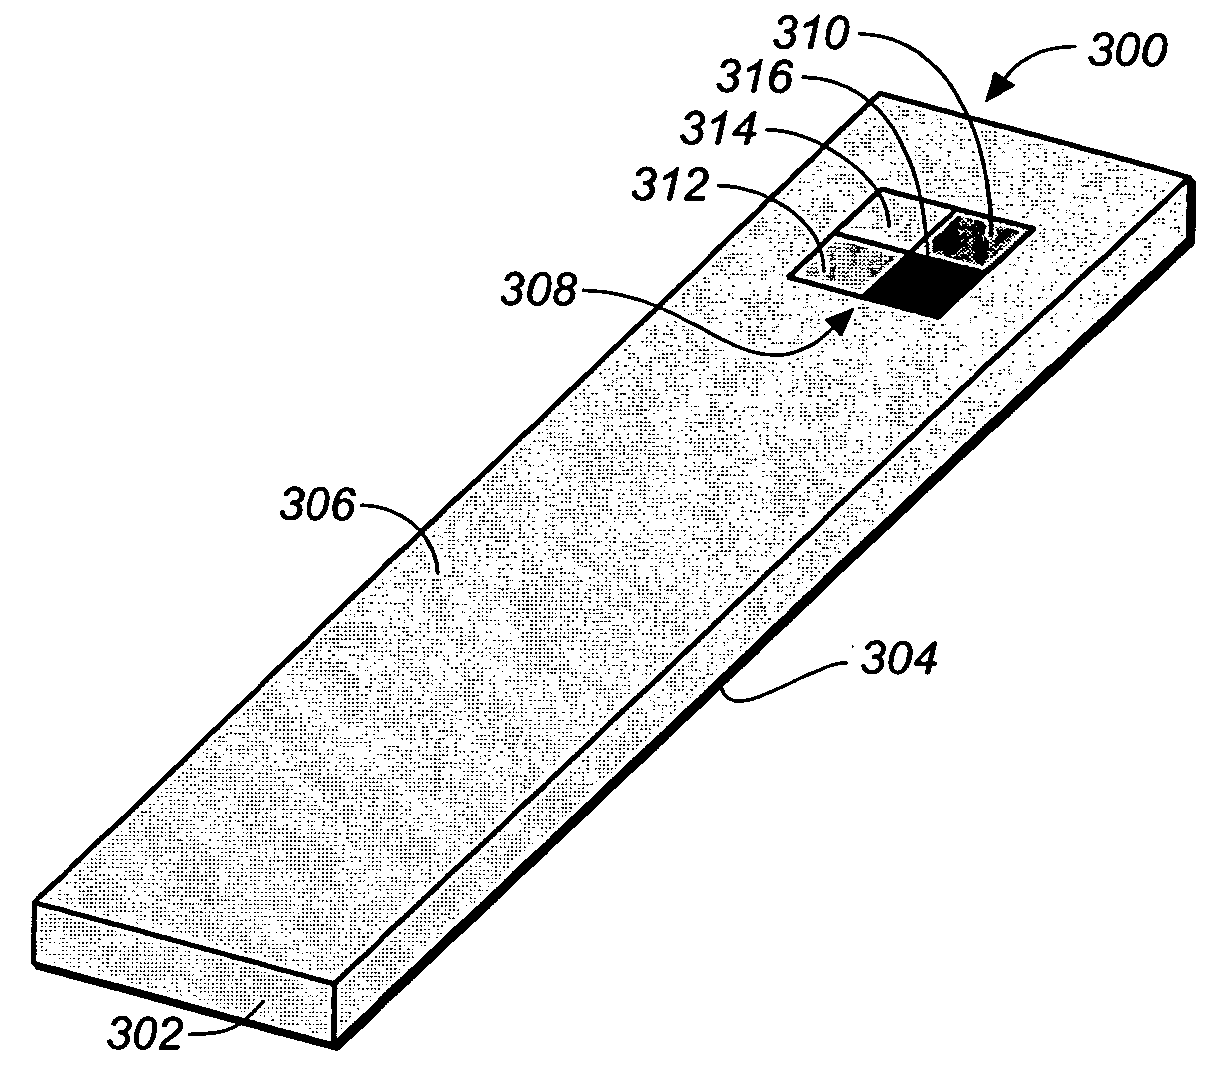 Method for determining a test strip calibration code for use in a meter